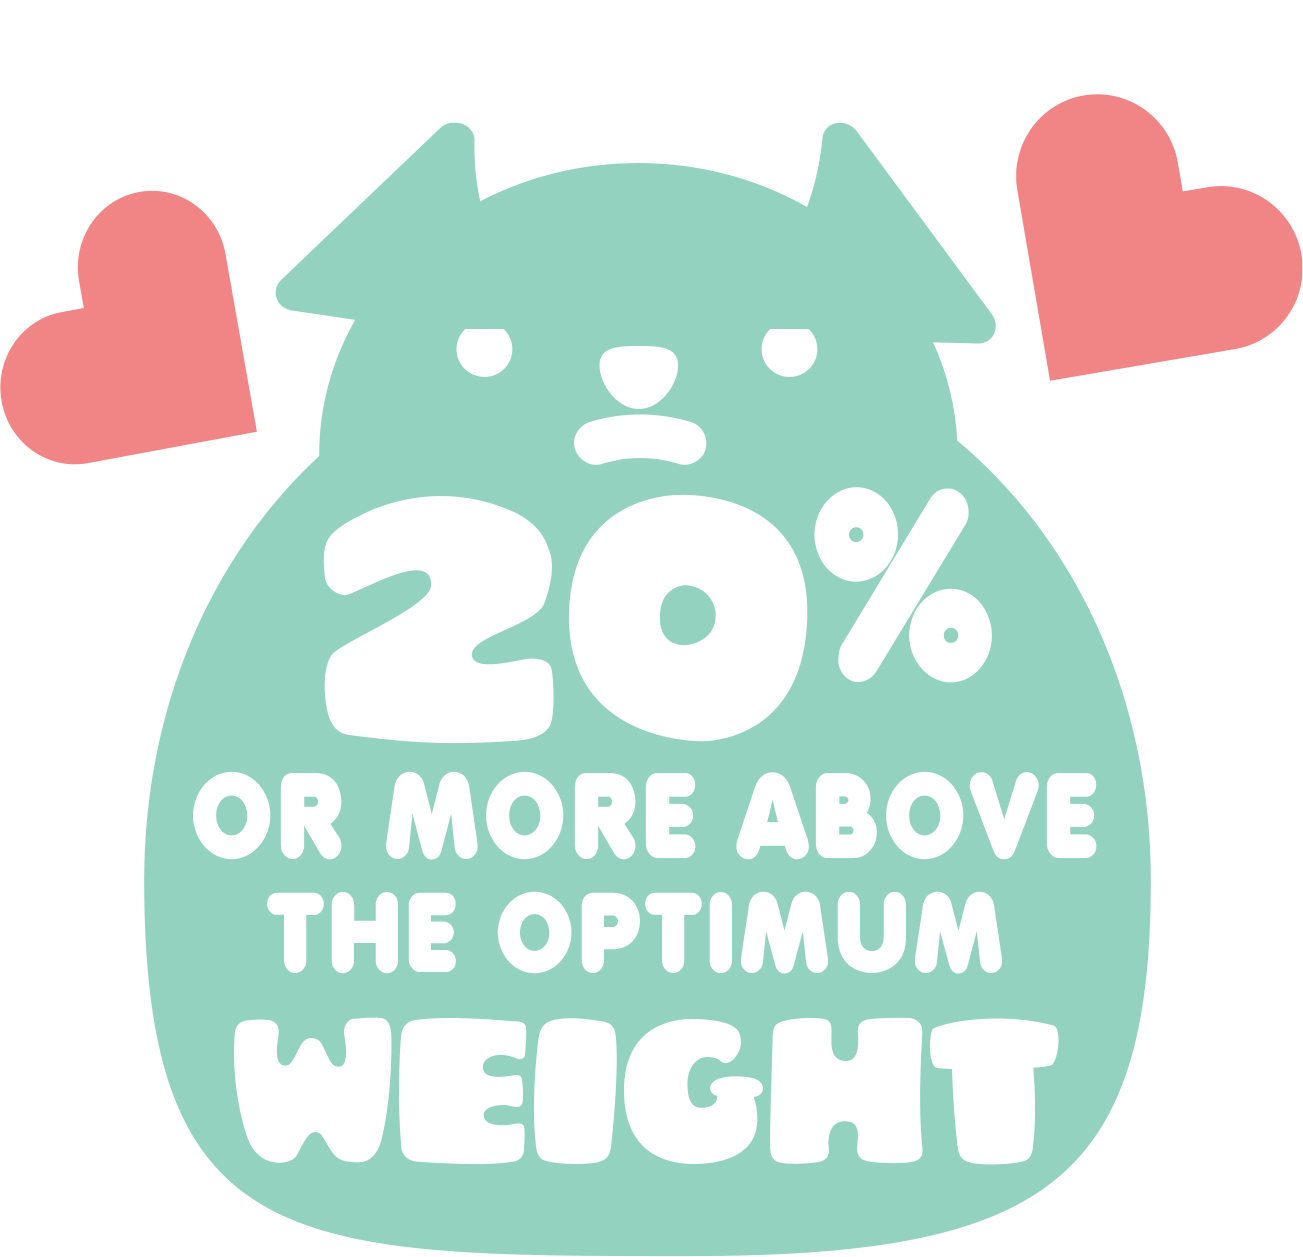 Vector of dog with "20% or more above the optimum weight" on its belly